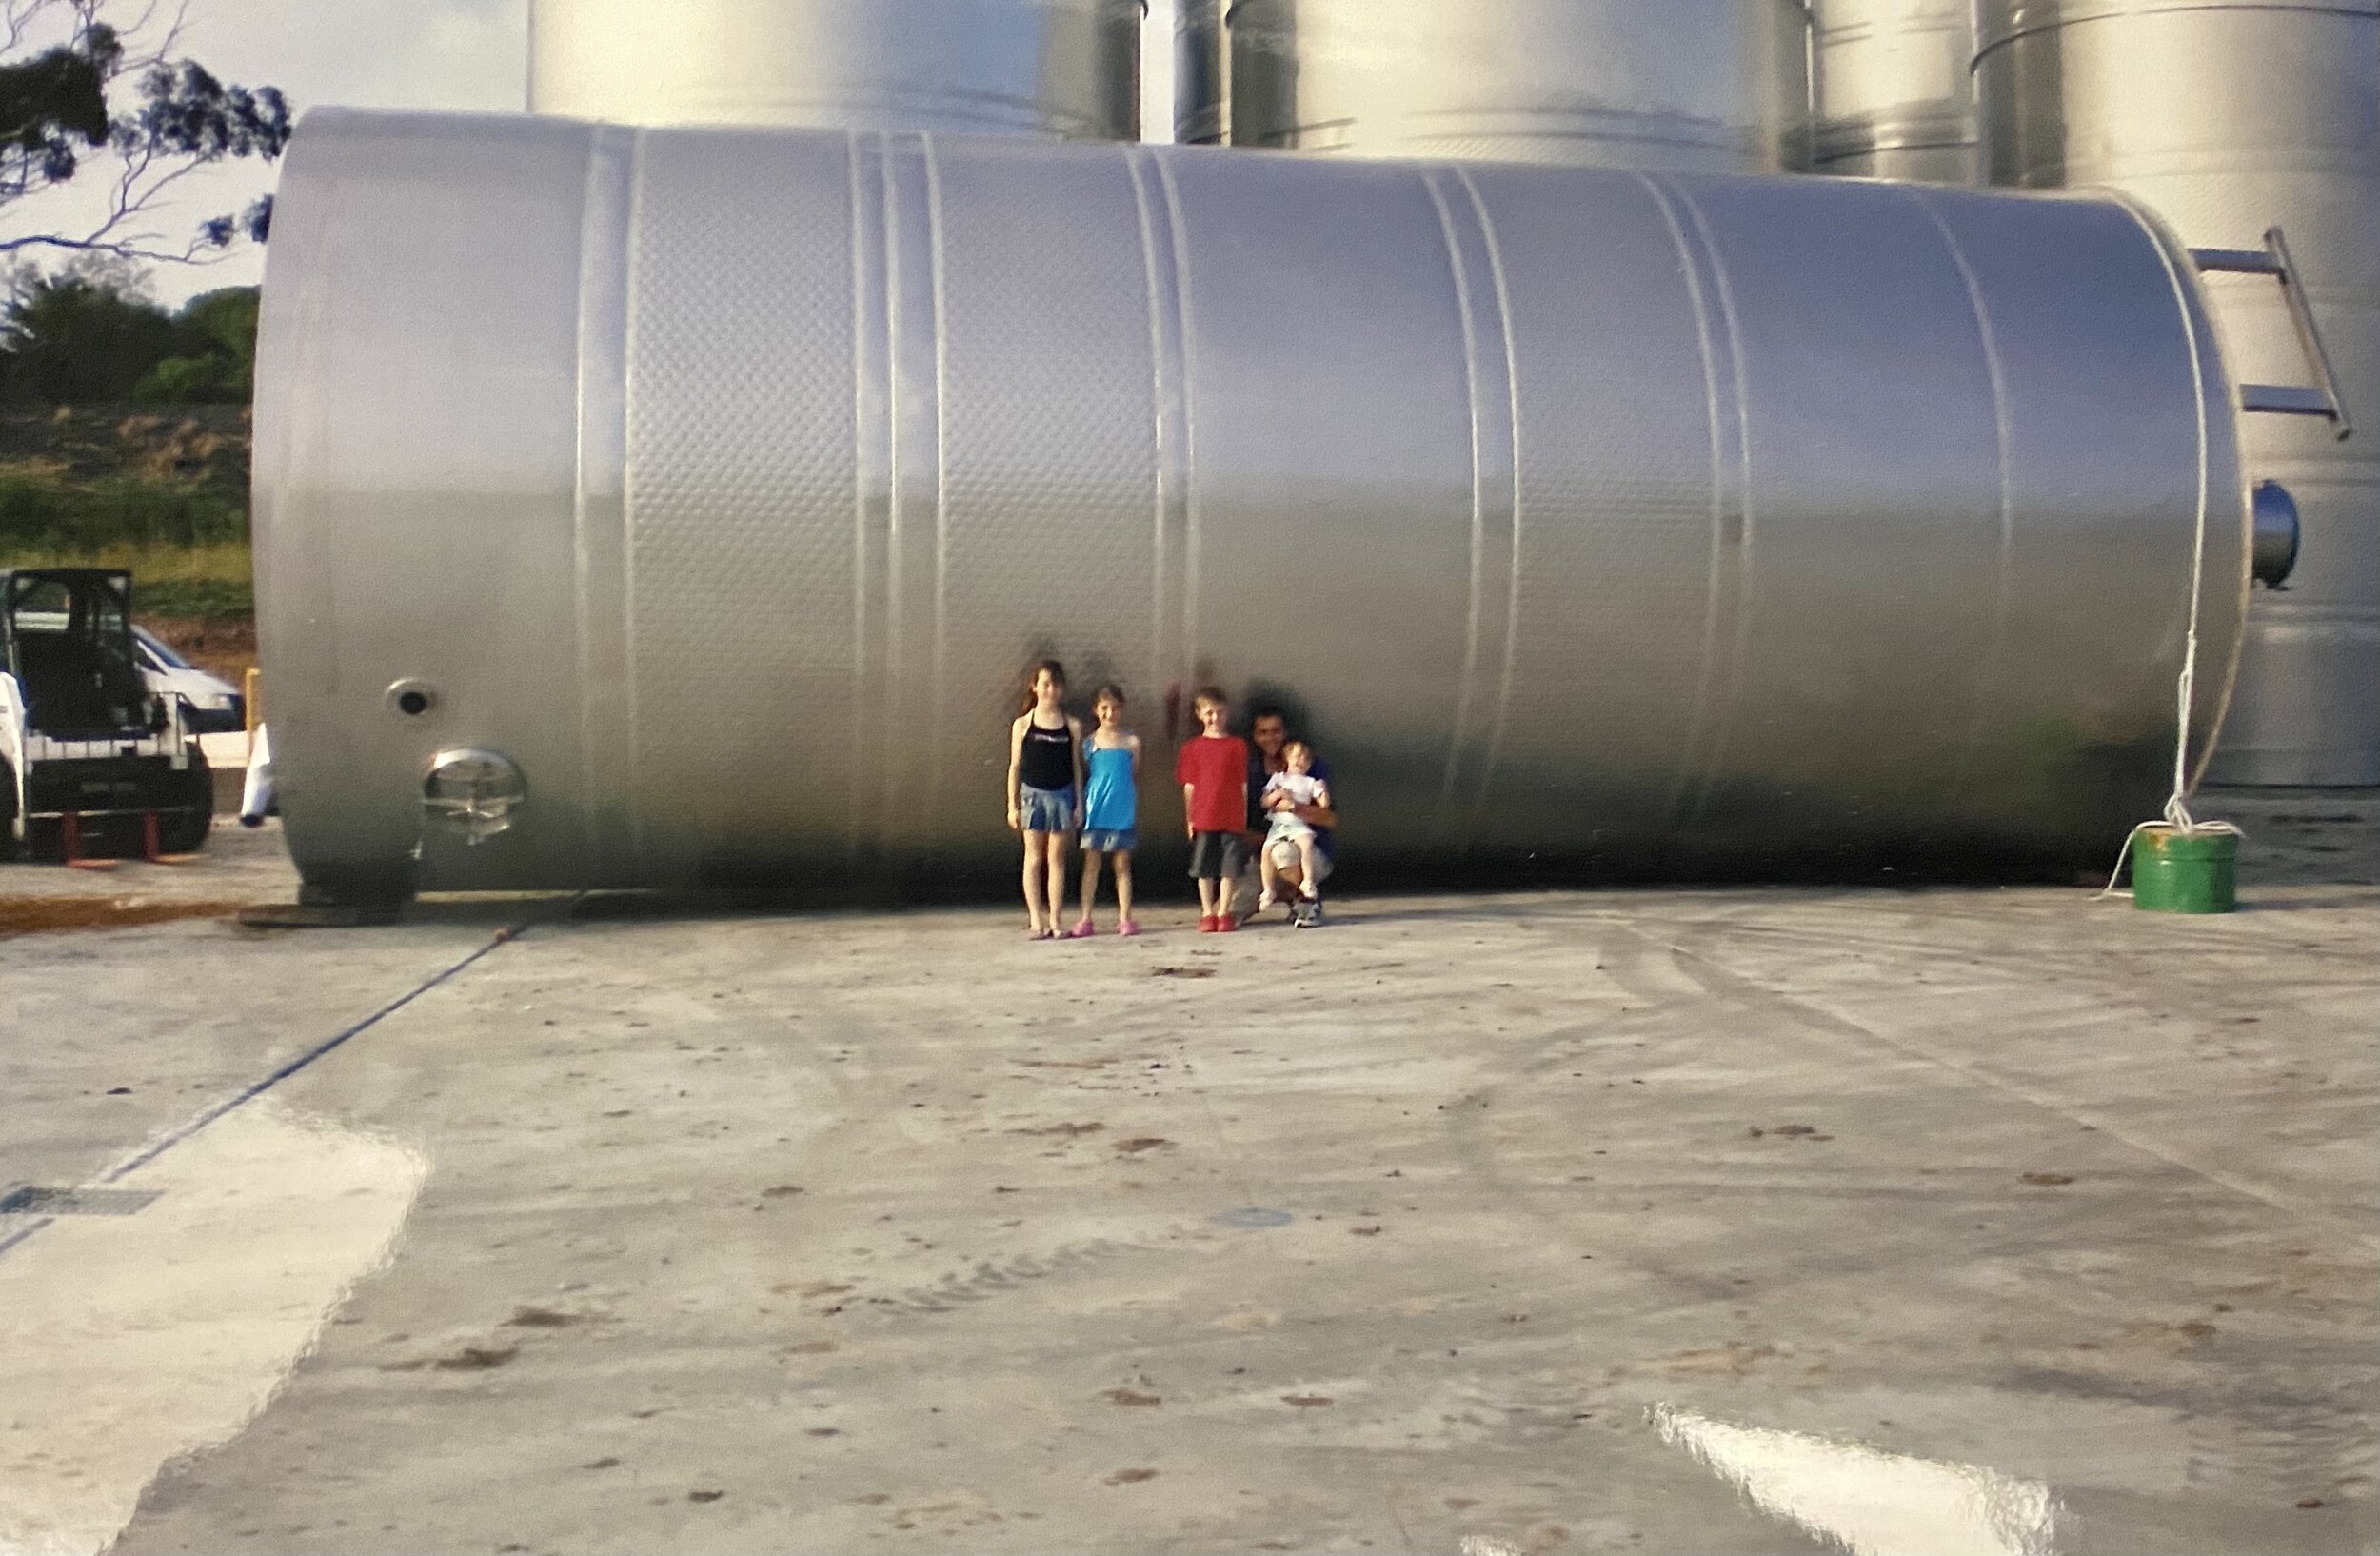 Michael and his 4 children at the tank farm development in 2008